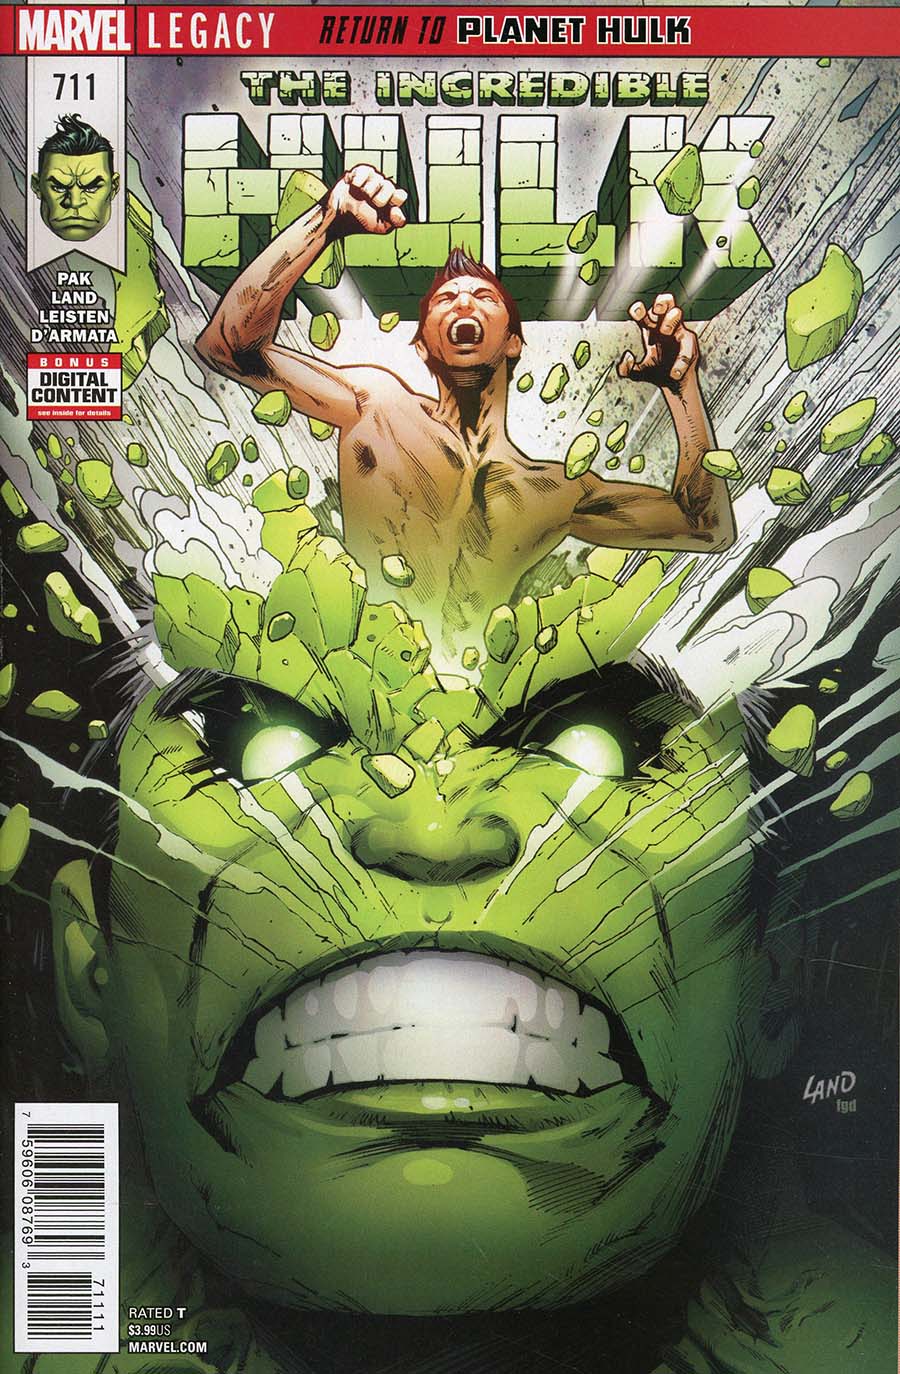 Incredible Hulk Vol 4 #711 Cover A Regular Greg Land Cover (Marvel Legacy Tie-In)